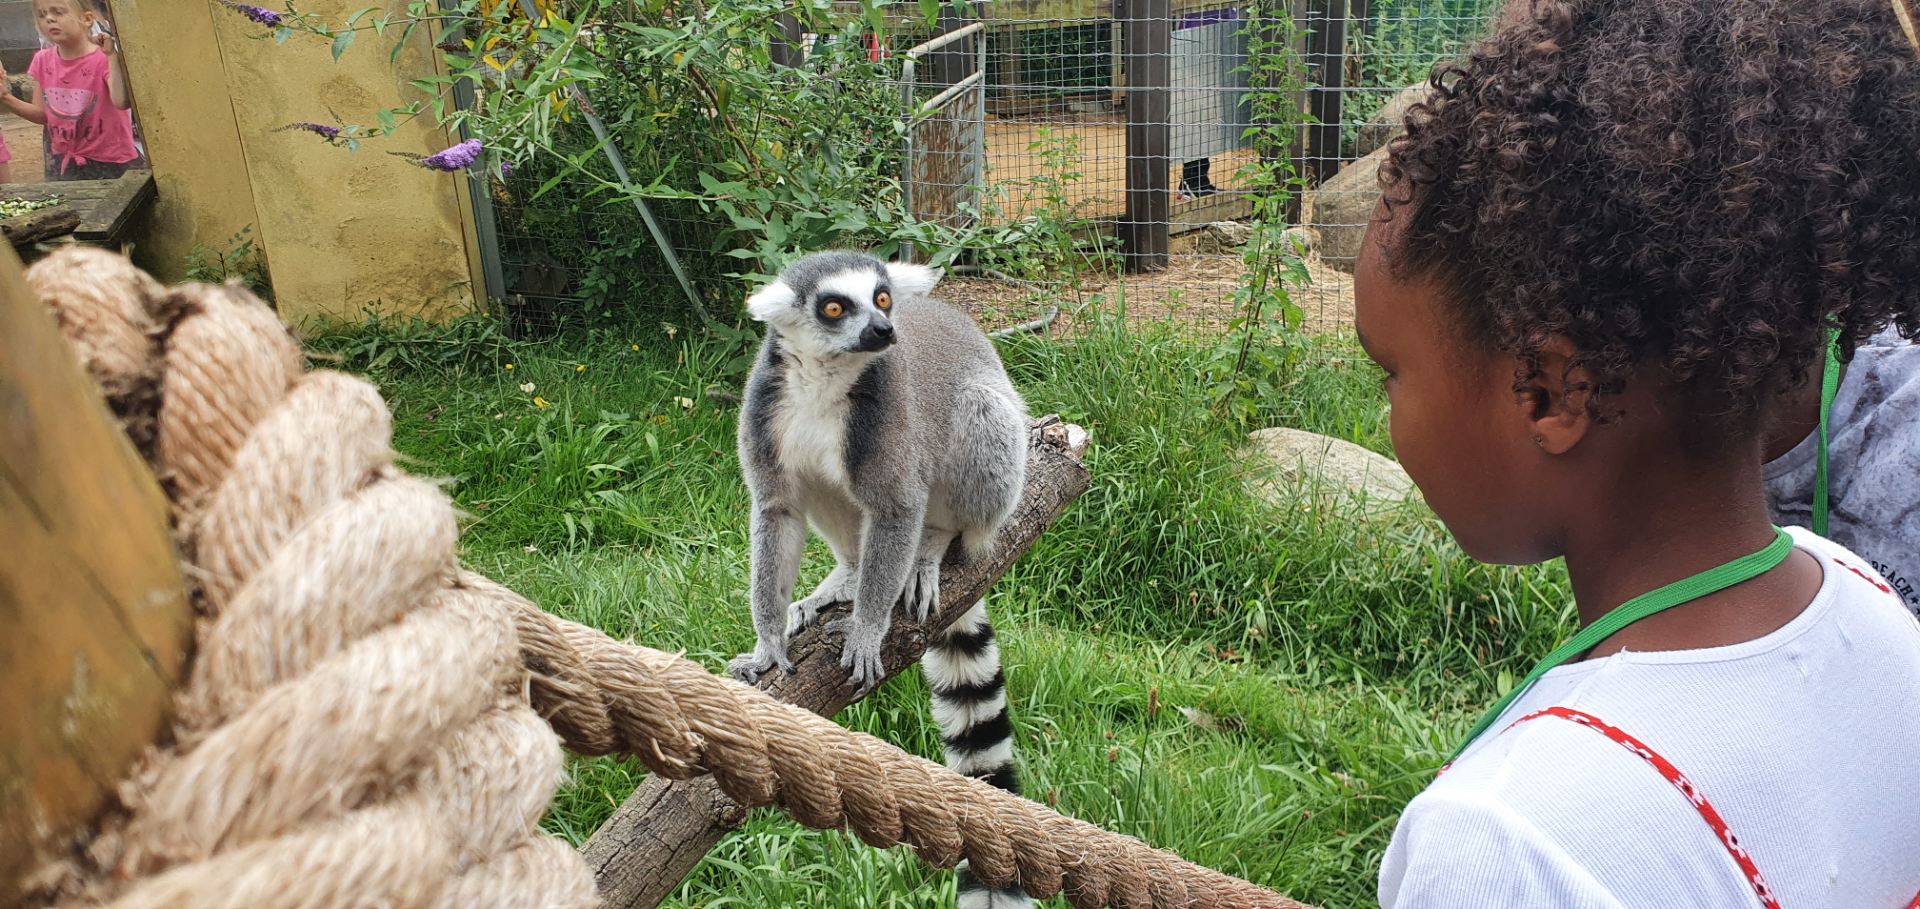 Girl and lemur in a zoo enclosure